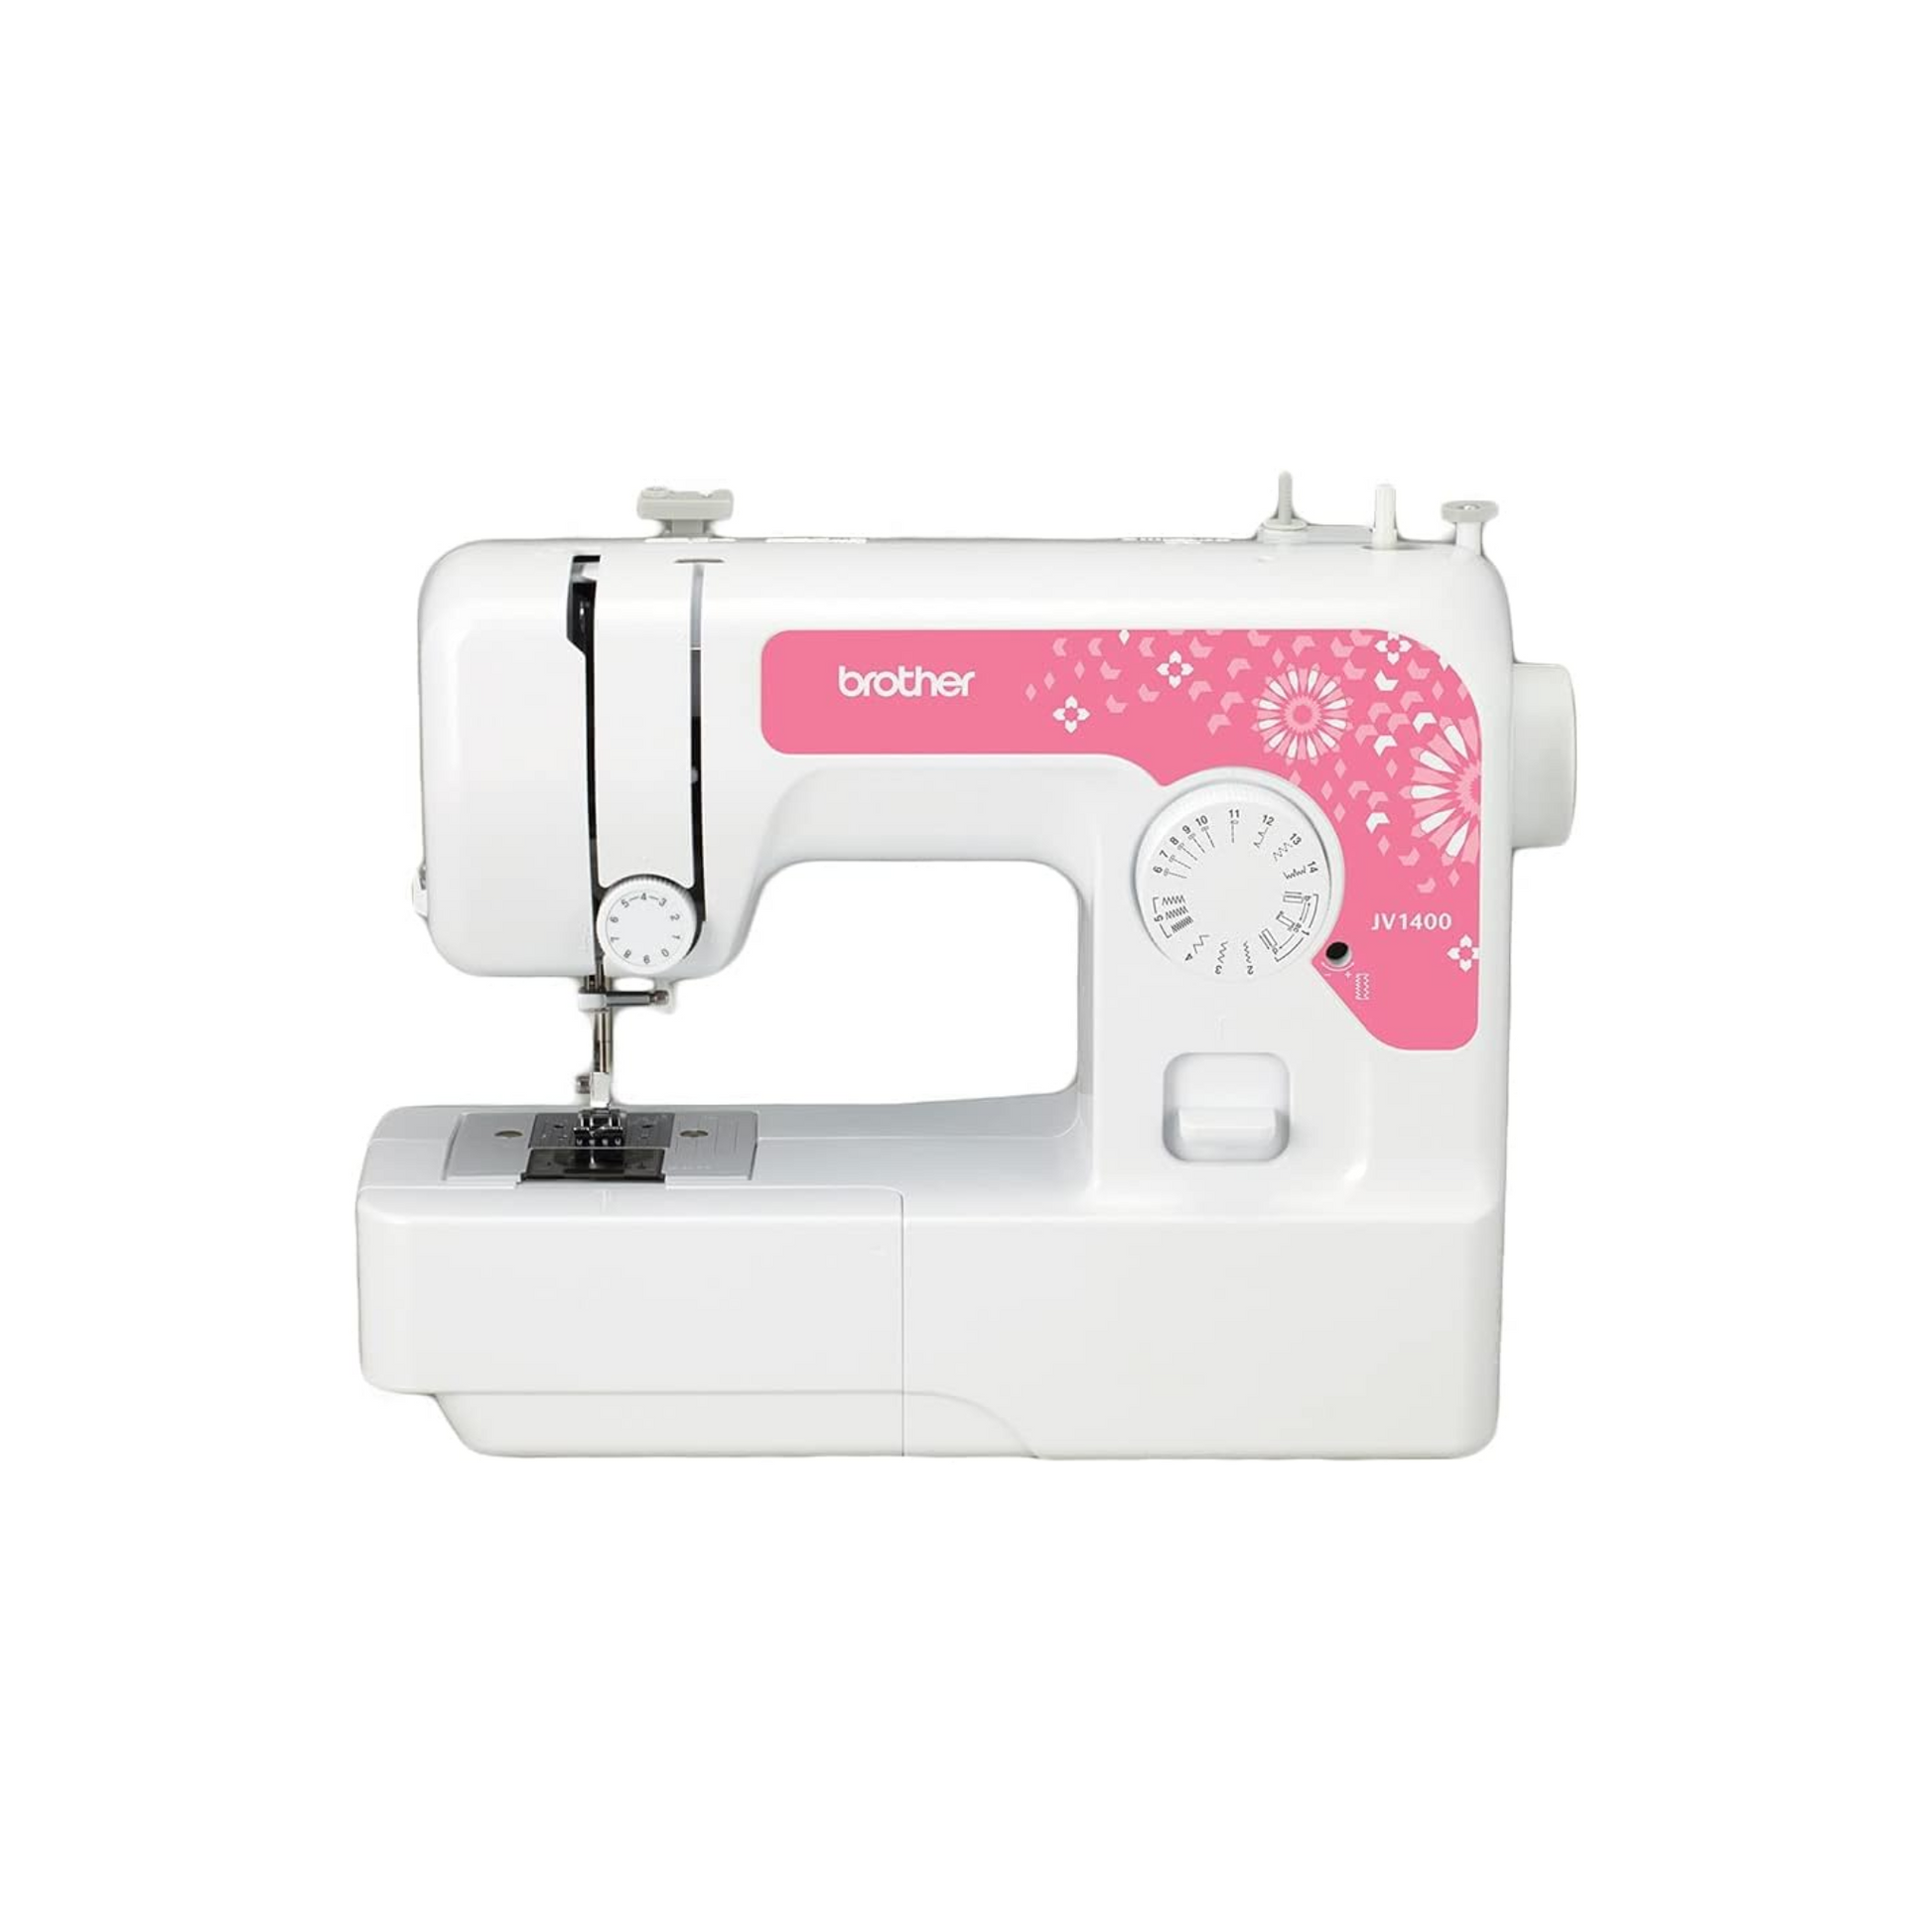 Brother JV1400 - Sewing machine - White - Front view